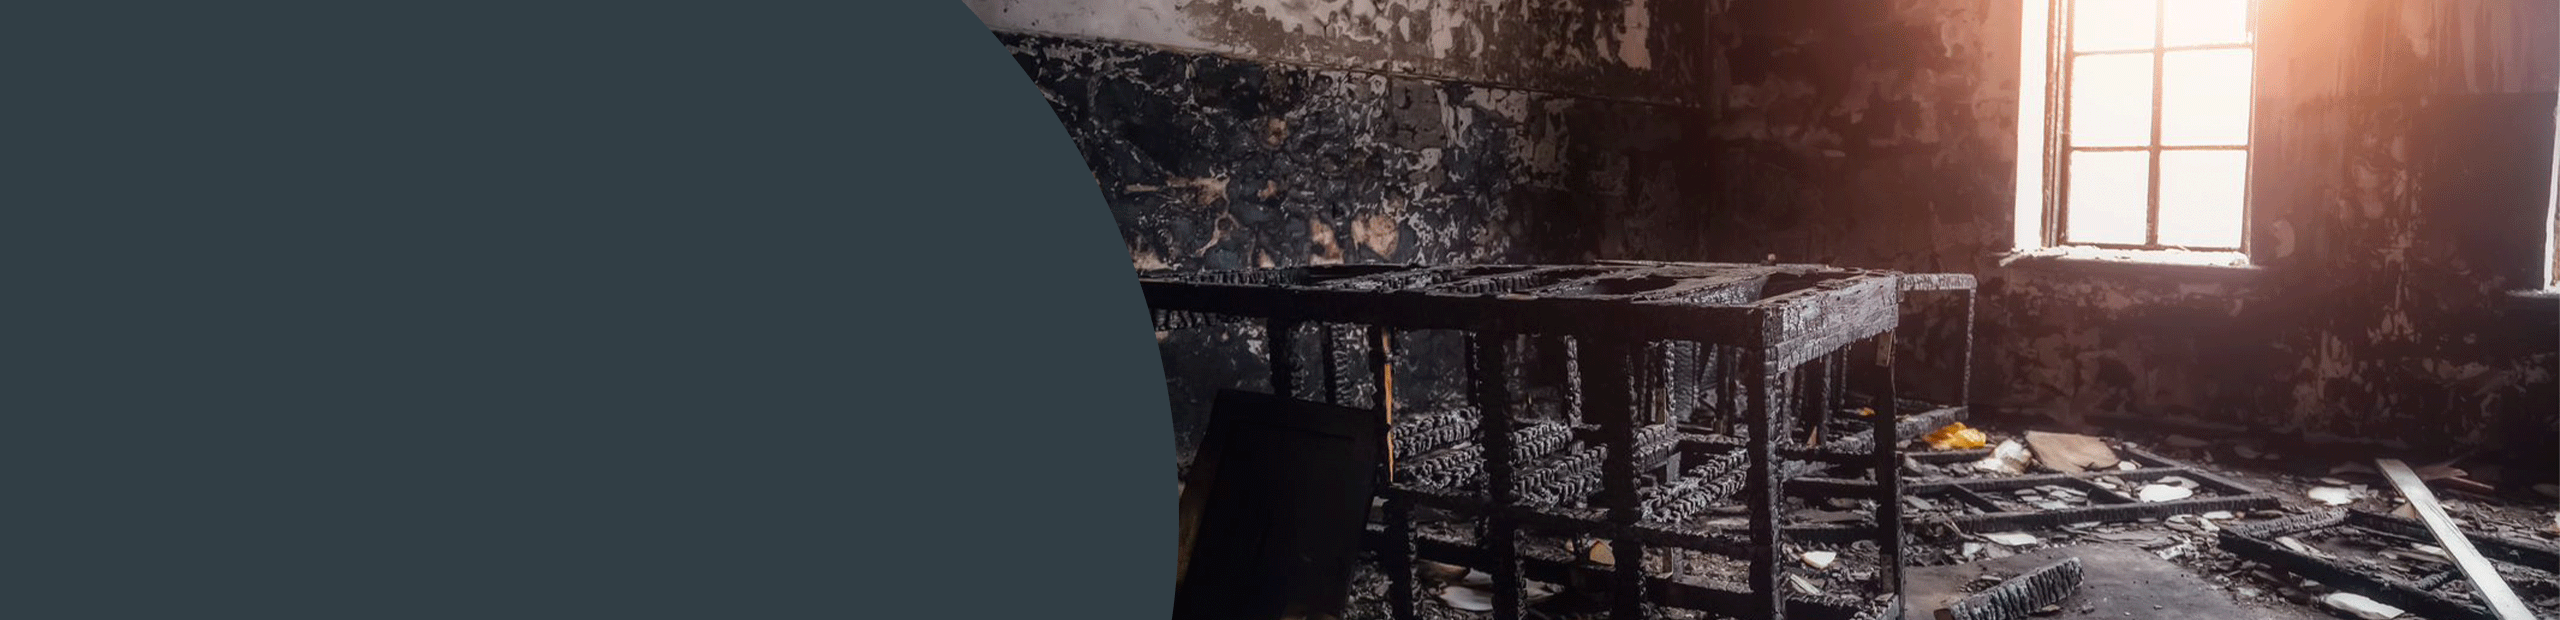 Fire Damage Cleaning Specialists - Tenterden